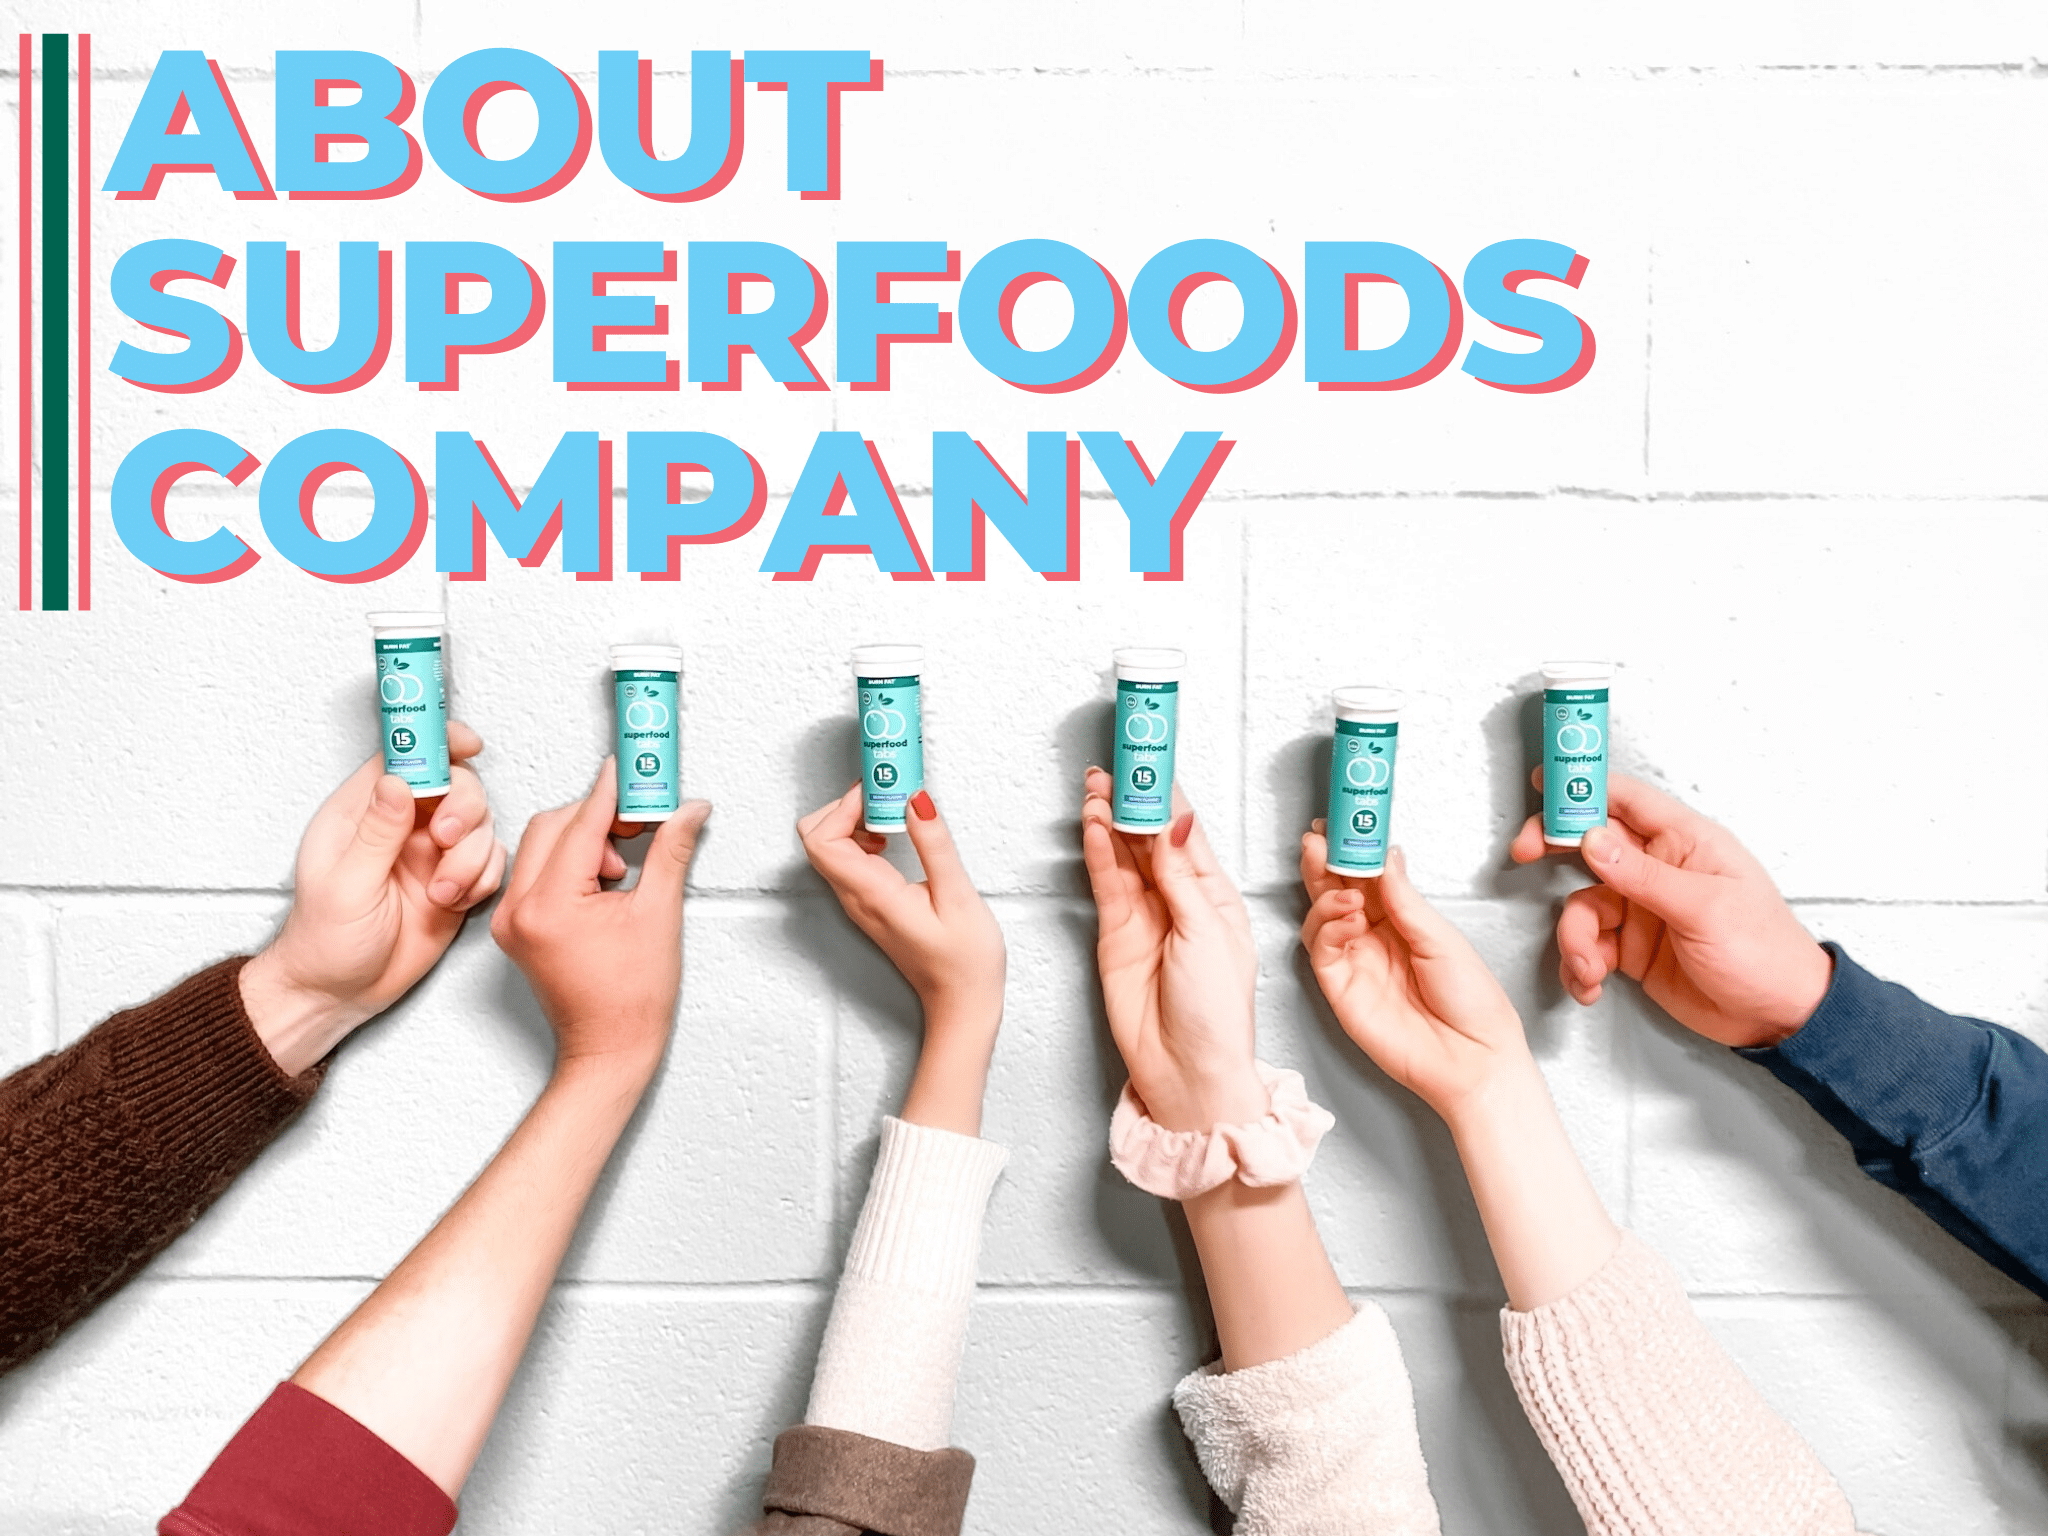 About Superfoods Company